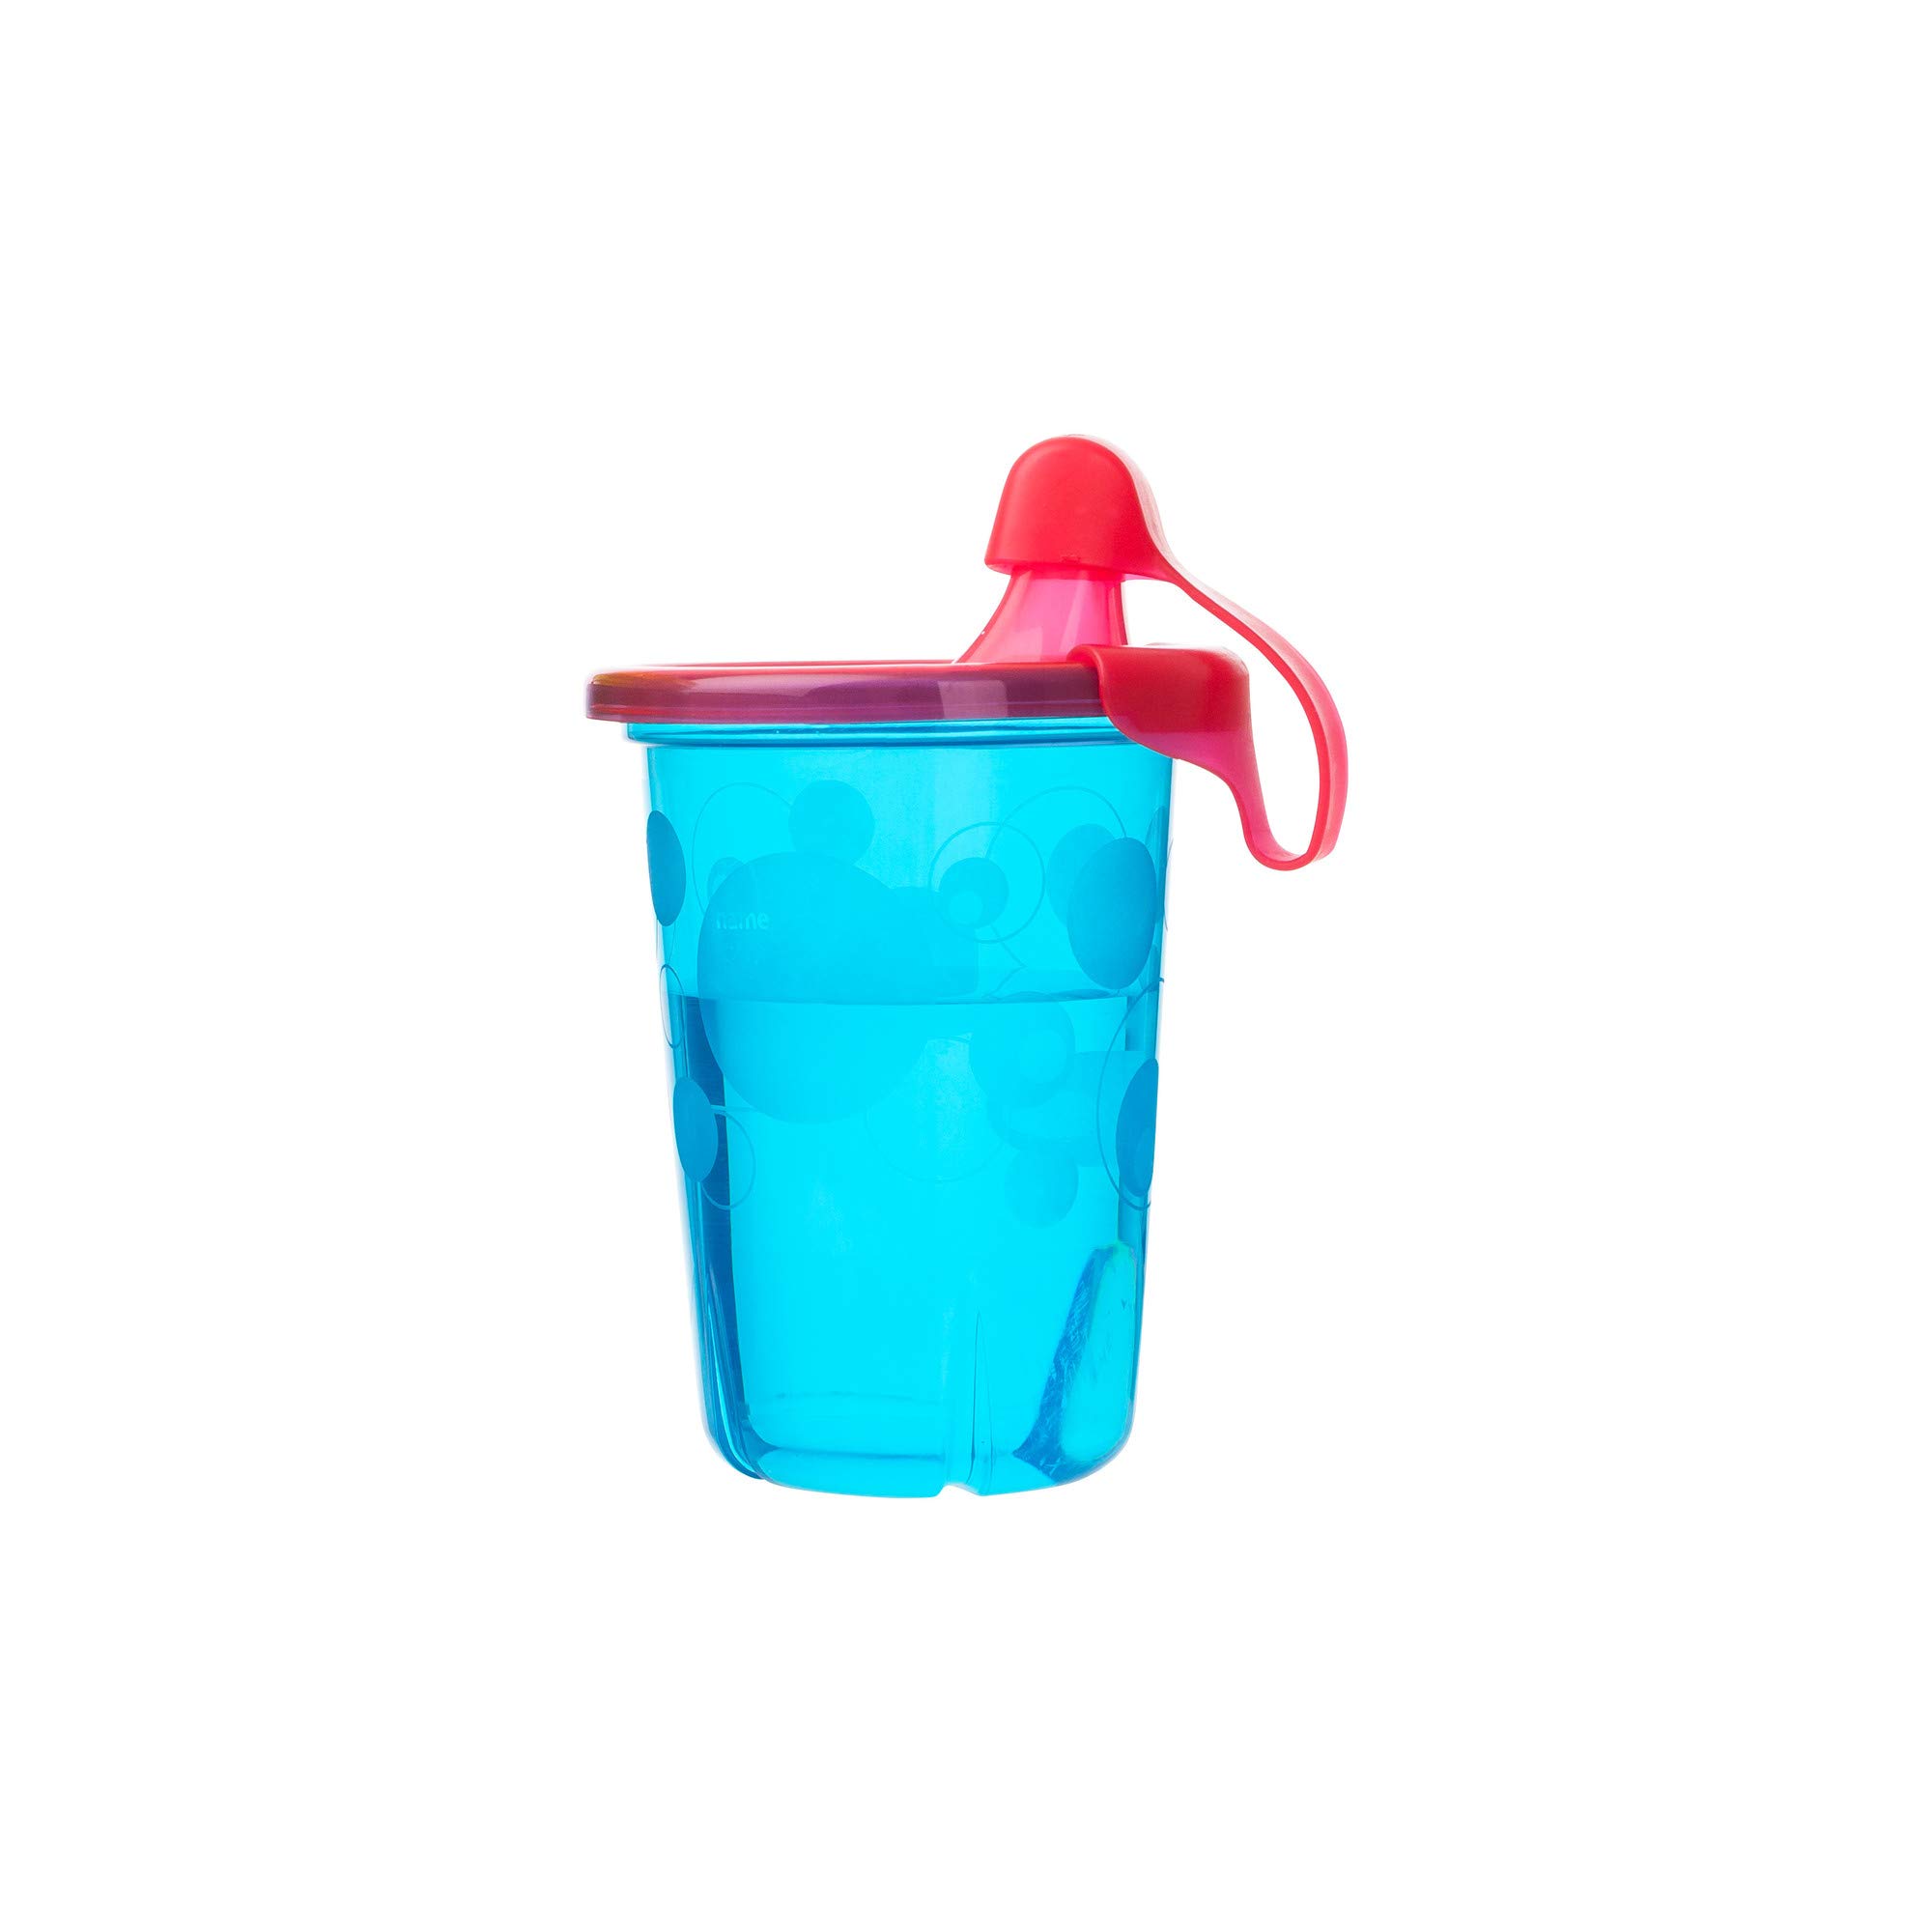 The First Years Take & Toss Spill Proof Sippy Cups - Reusable Toddler Cups - Rainbow - Kids Cups and Snap On Lids for Ages 9 Months and Up - 4 Count